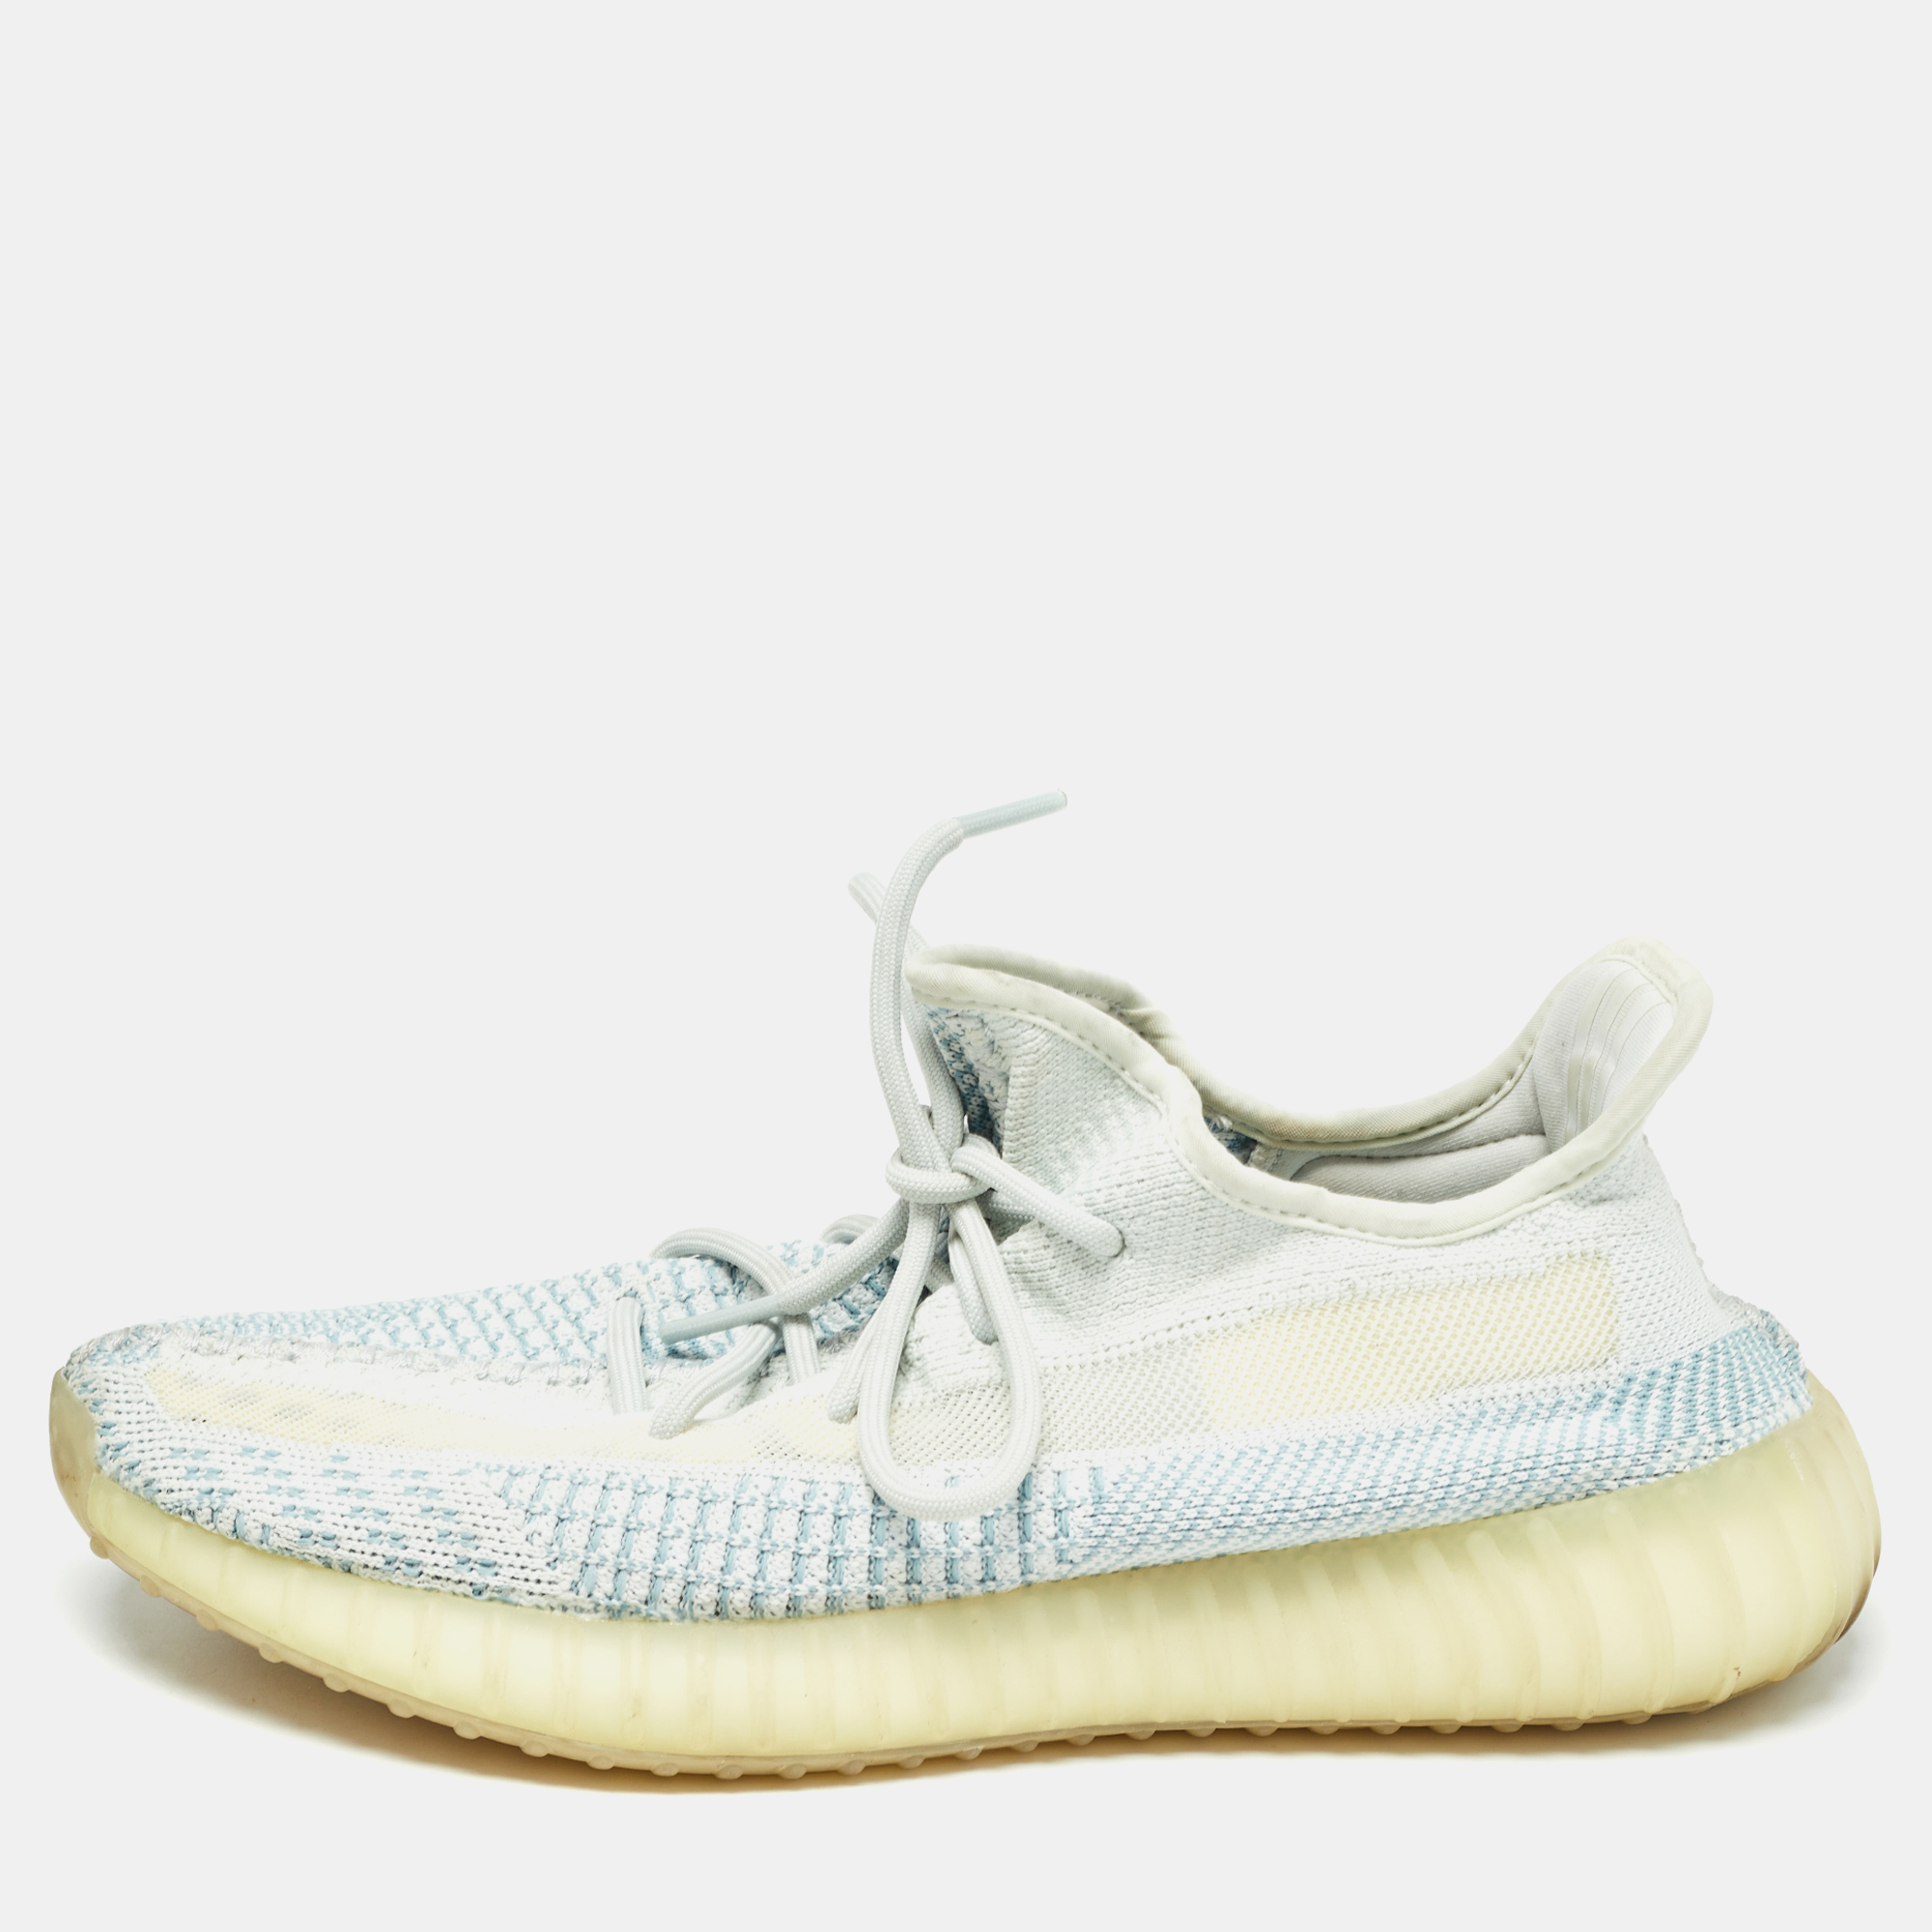 Yeezy x adidas white/green knit fabric boost 350 v2 cloud white non reflective sneakers size 44